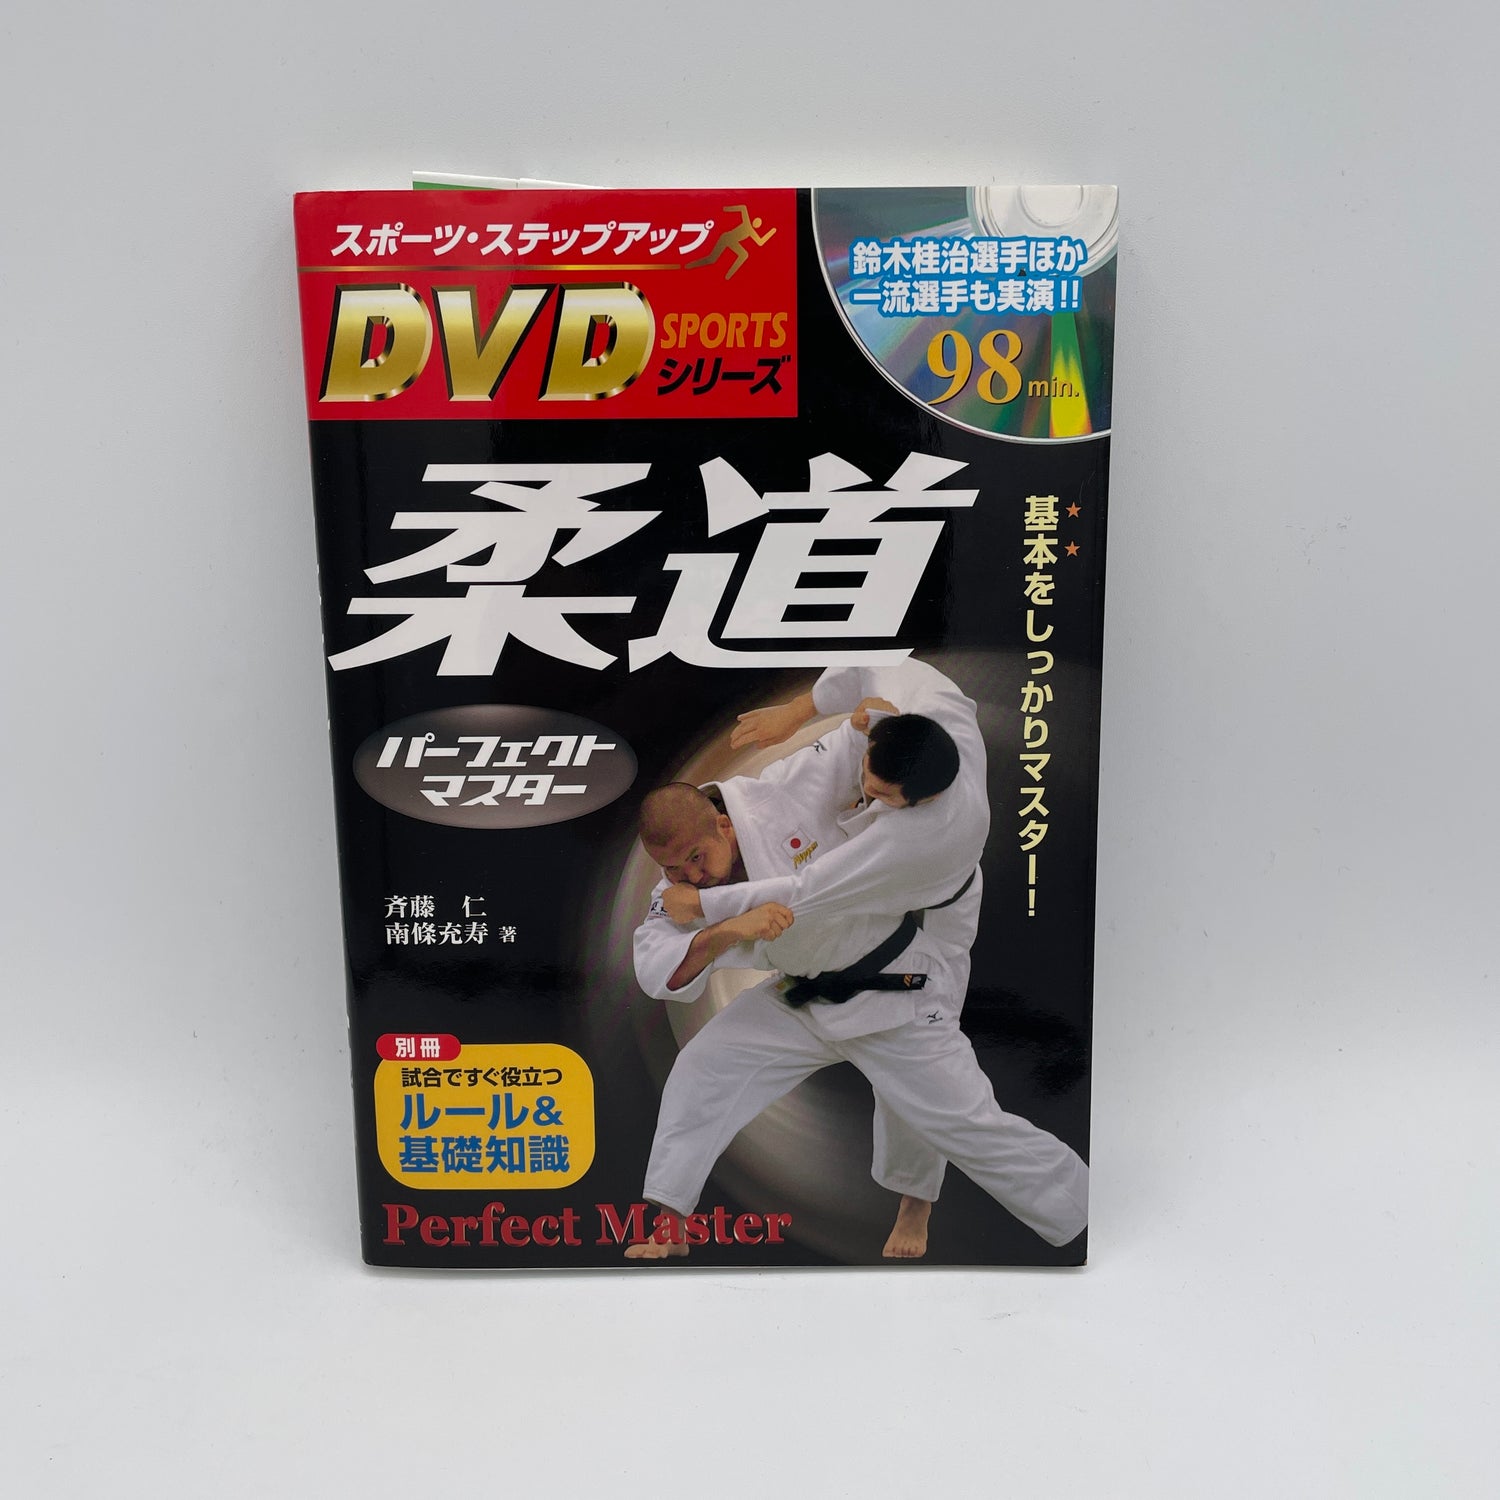 Judo Perfect Mastery Book & DVD By Olympic Gold Medalist Hitoshi Saito (Preowned)